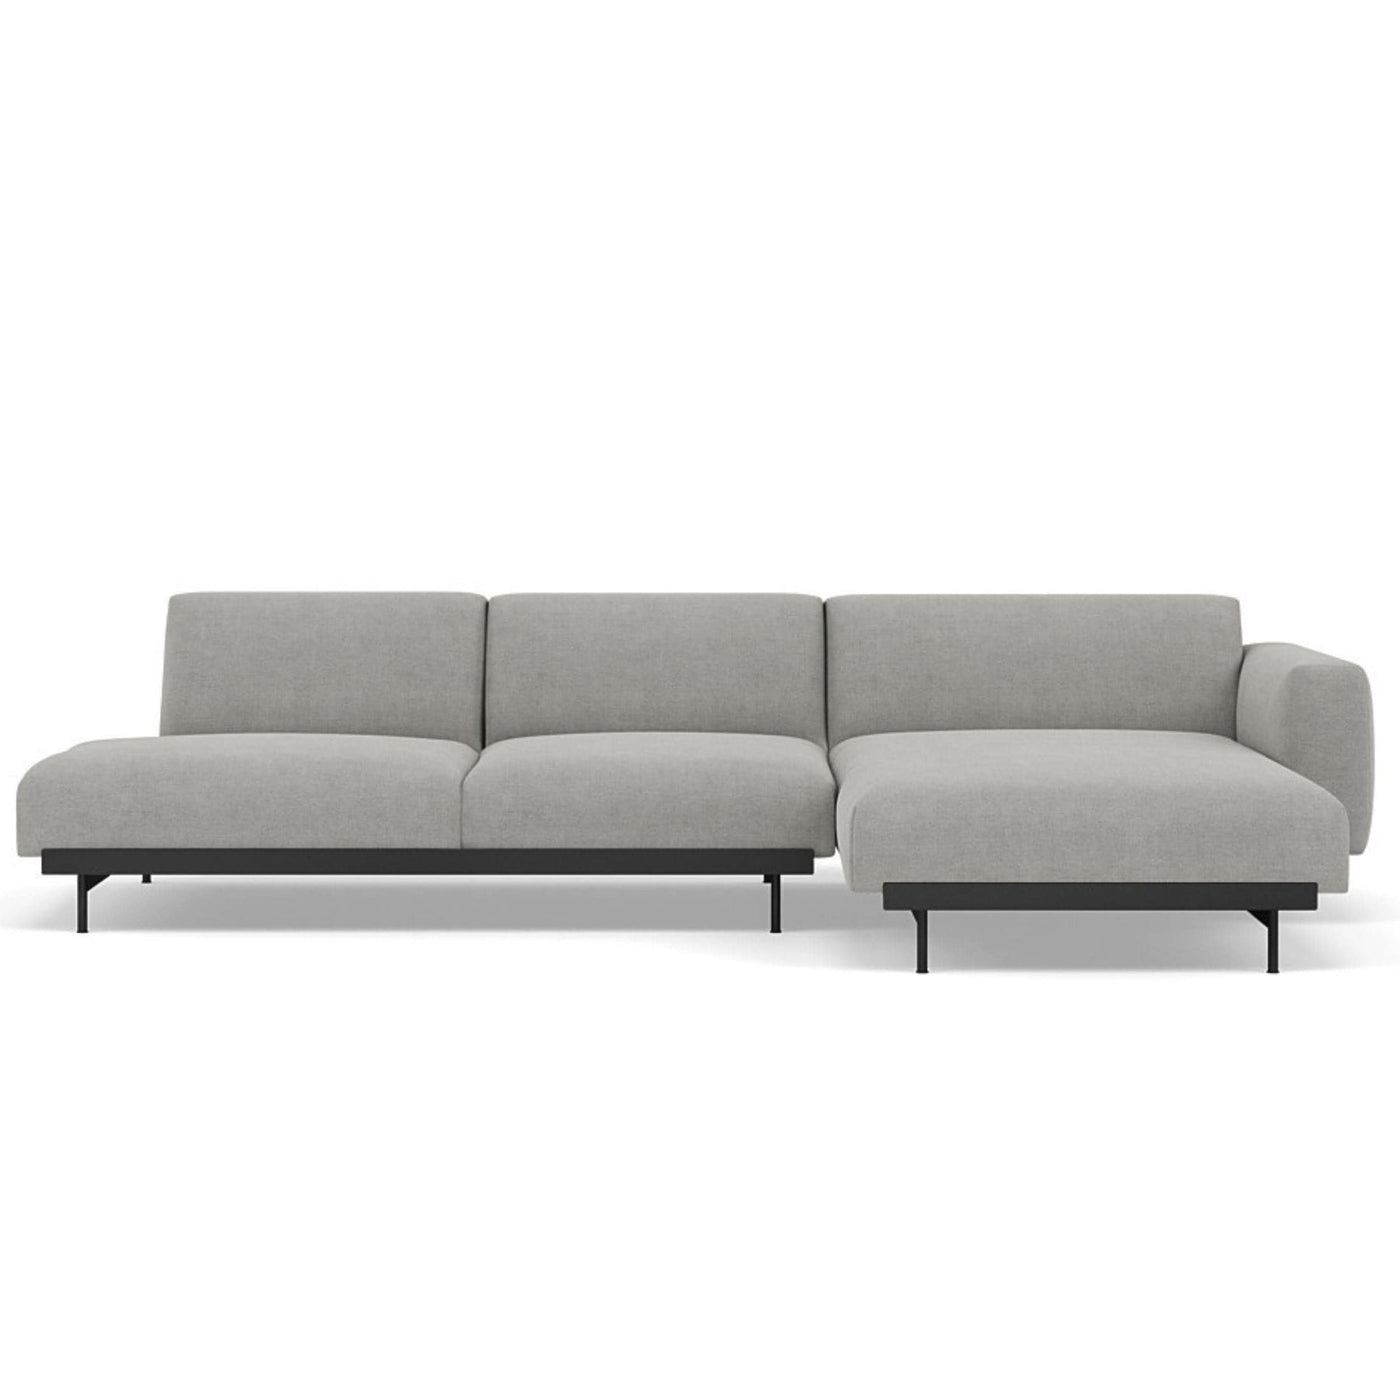 Muuto In Situ Modular 3 Seater Sofa, configuration 8. Made to order from someday designs. #colour_fiord-151